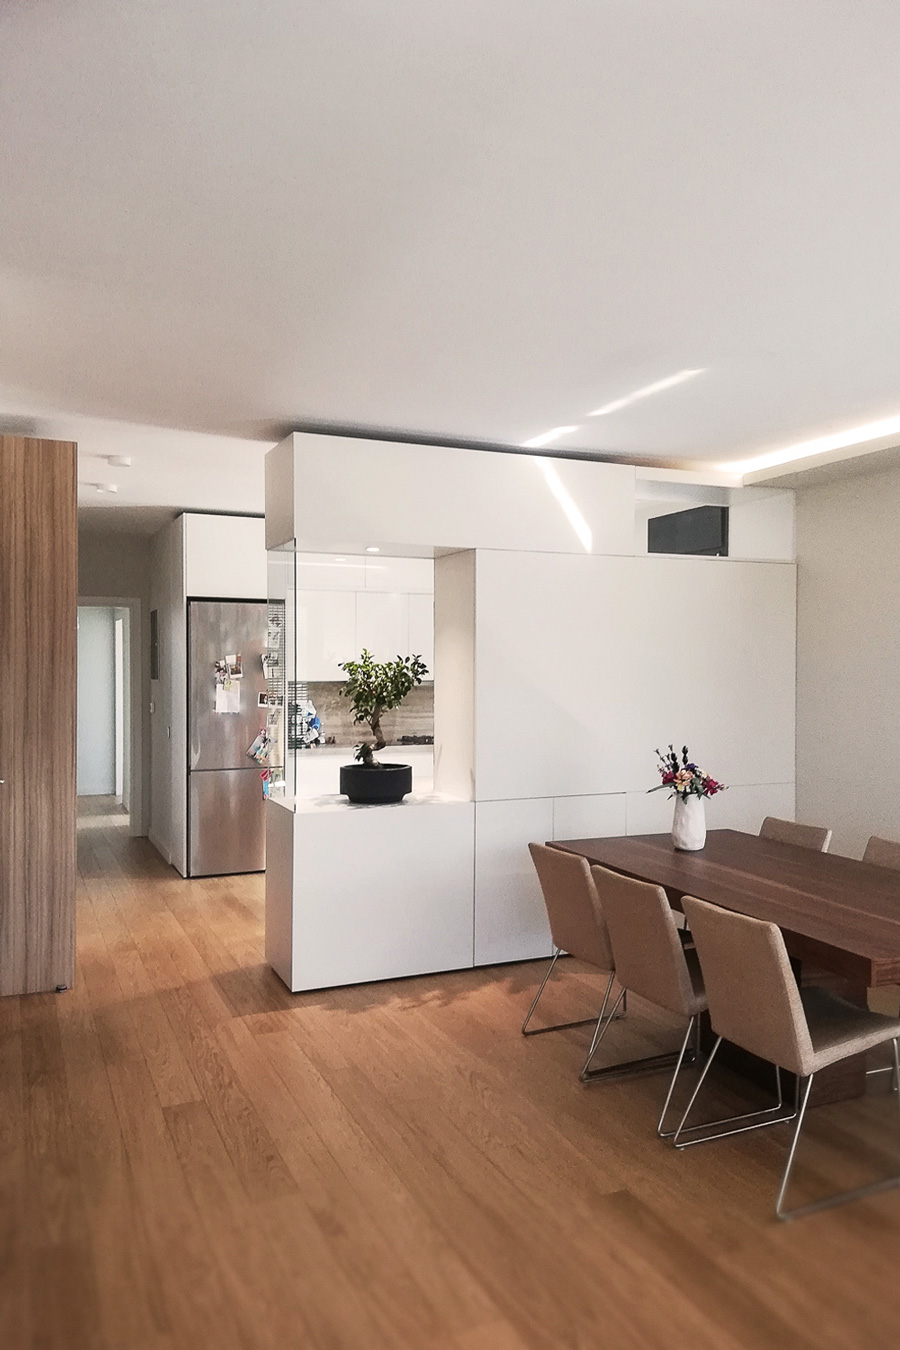 The multifunctional lacquered construction divides the kitchen from the dining room.